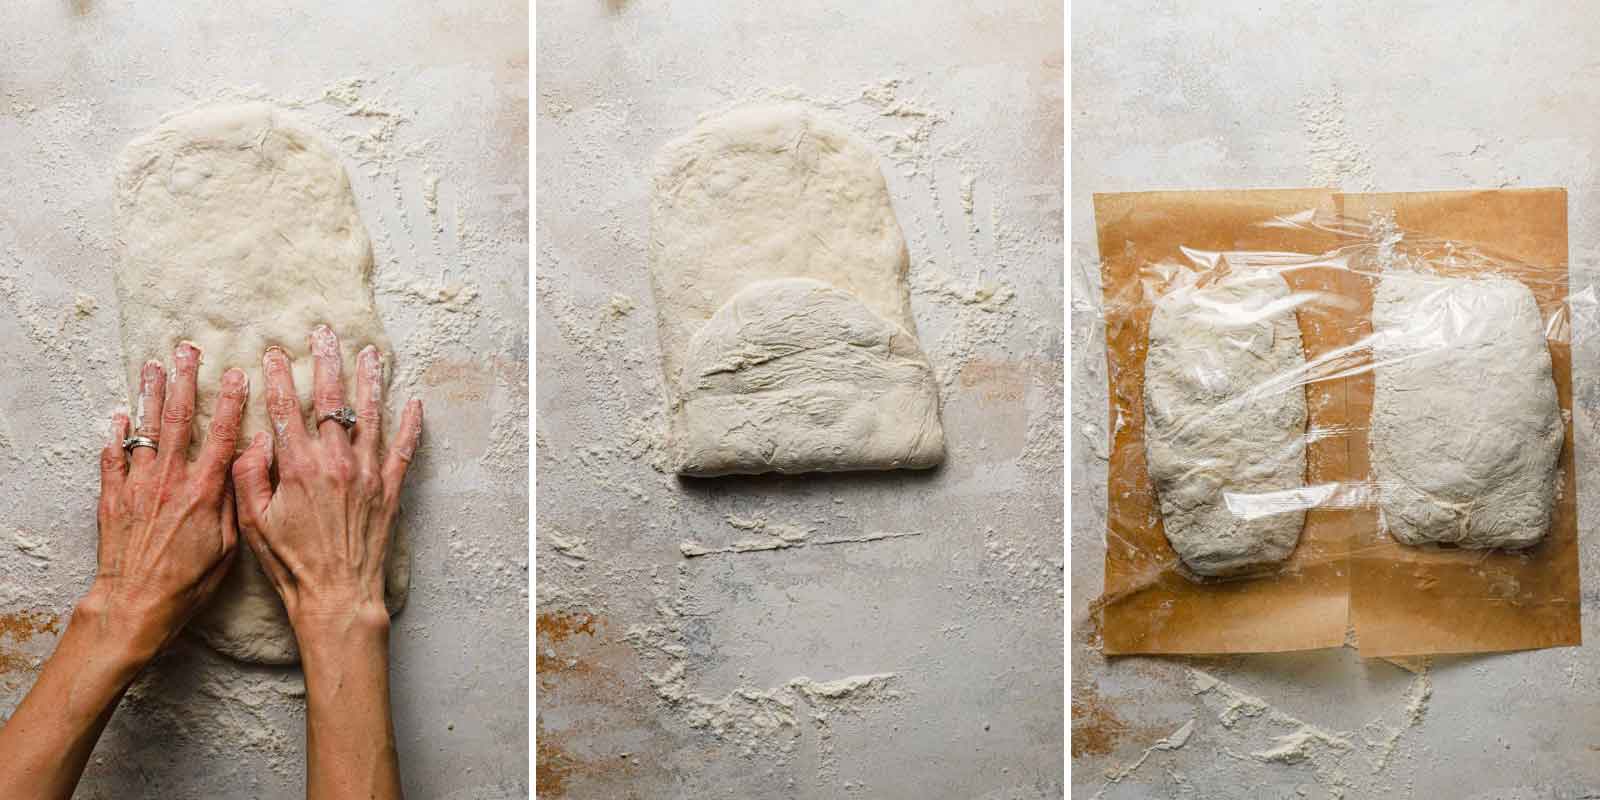 Photos of shaping ciabatta bread dough and covering to rise.